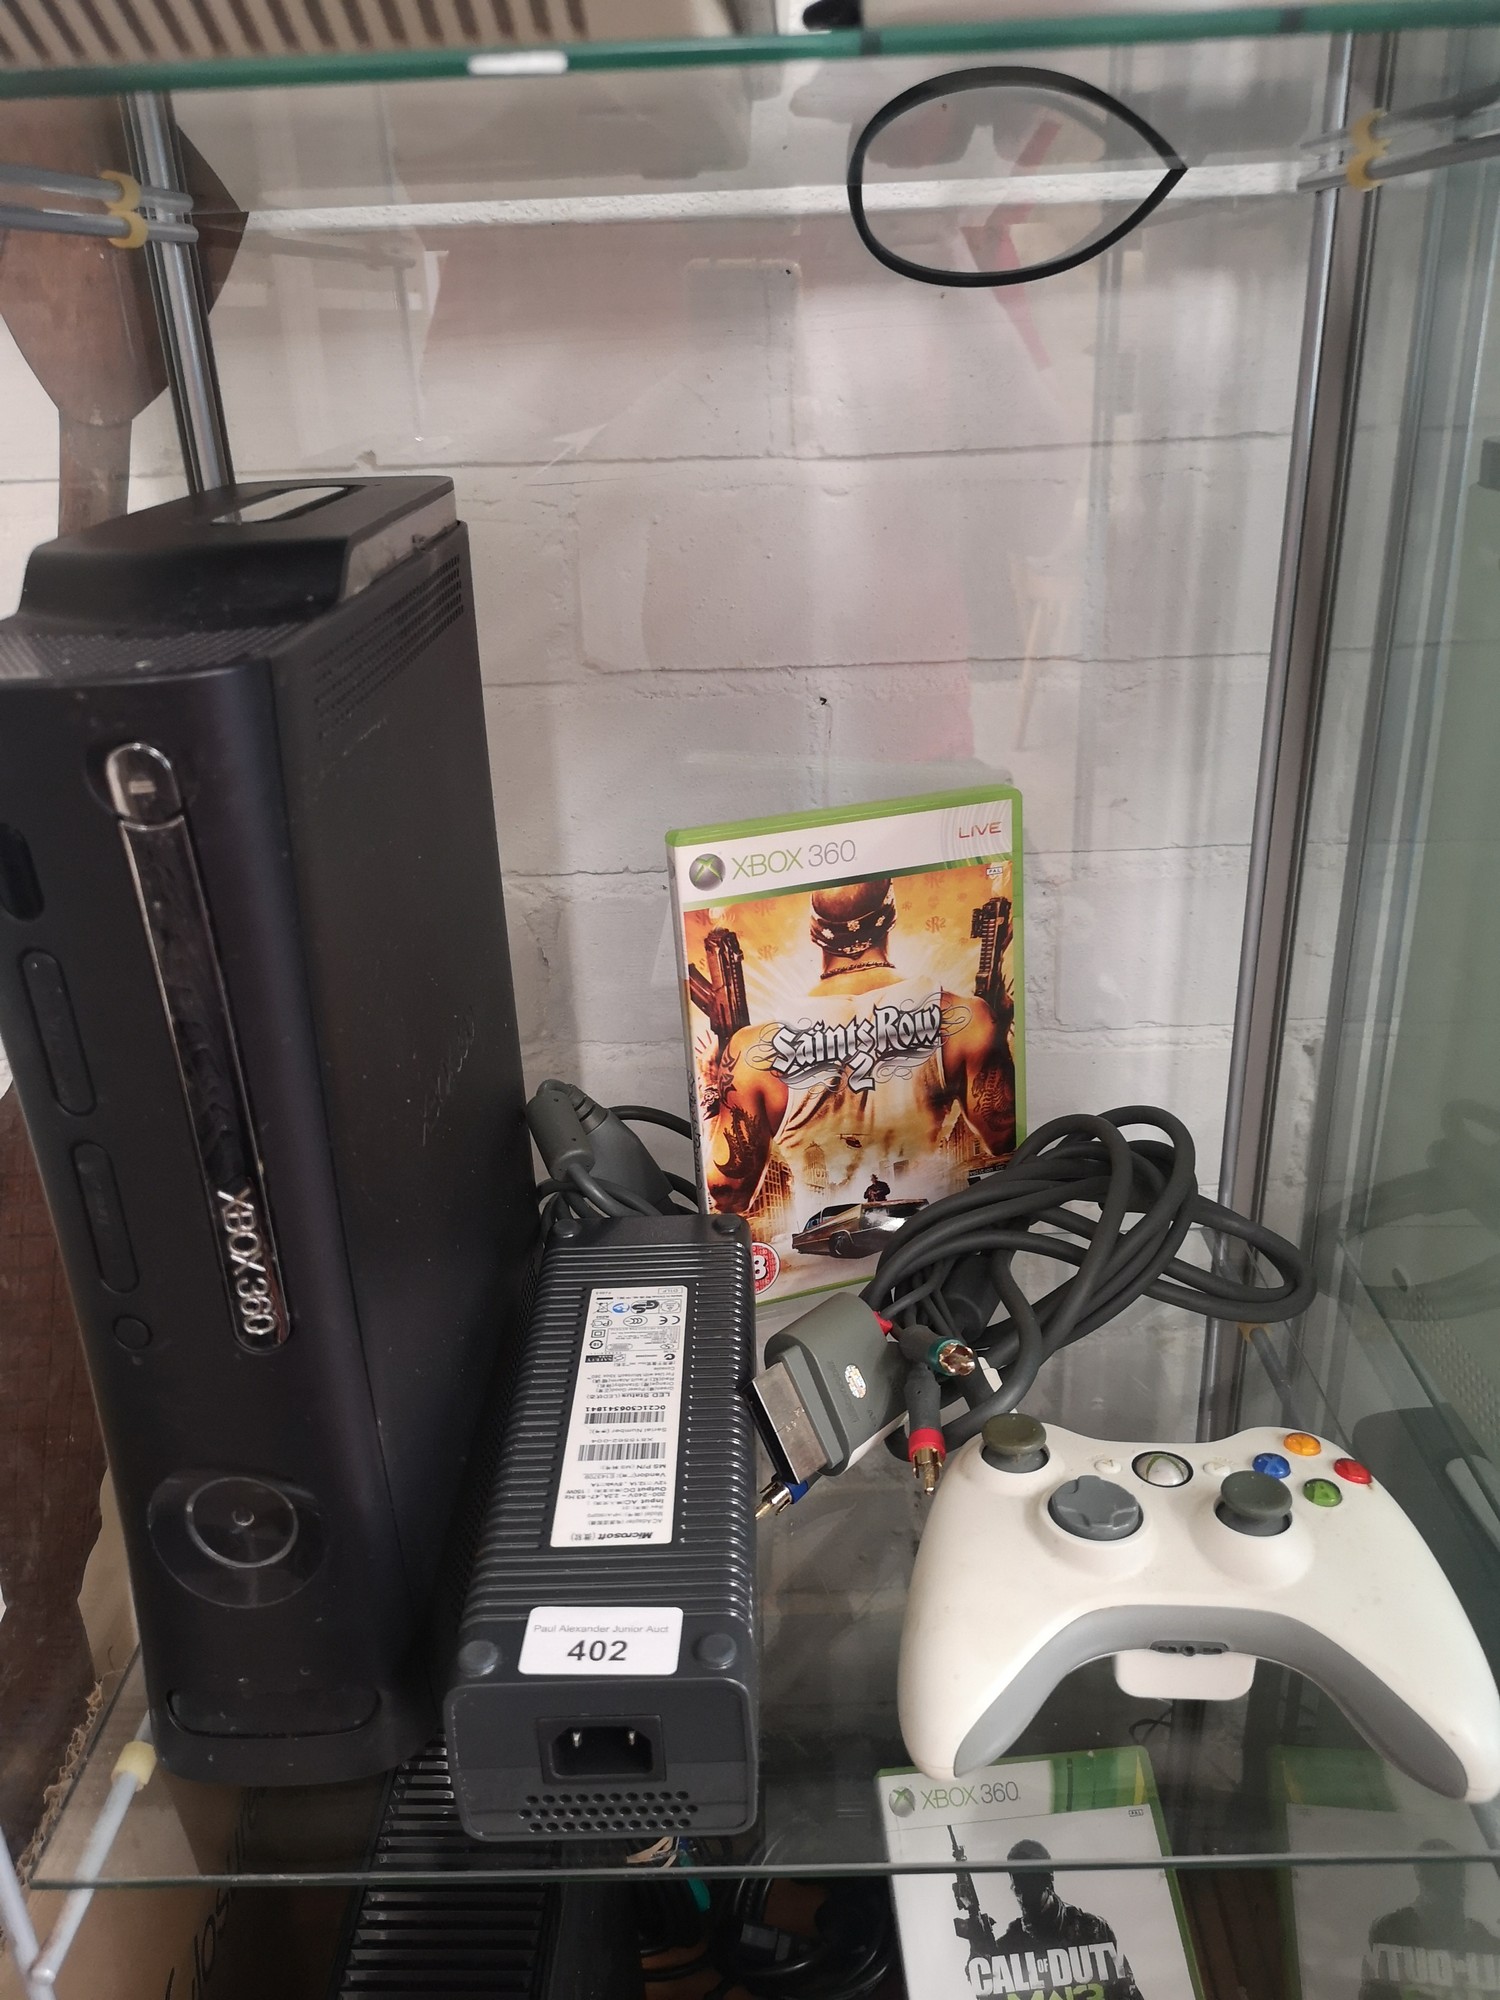 Xbox 360 console with controller and game.